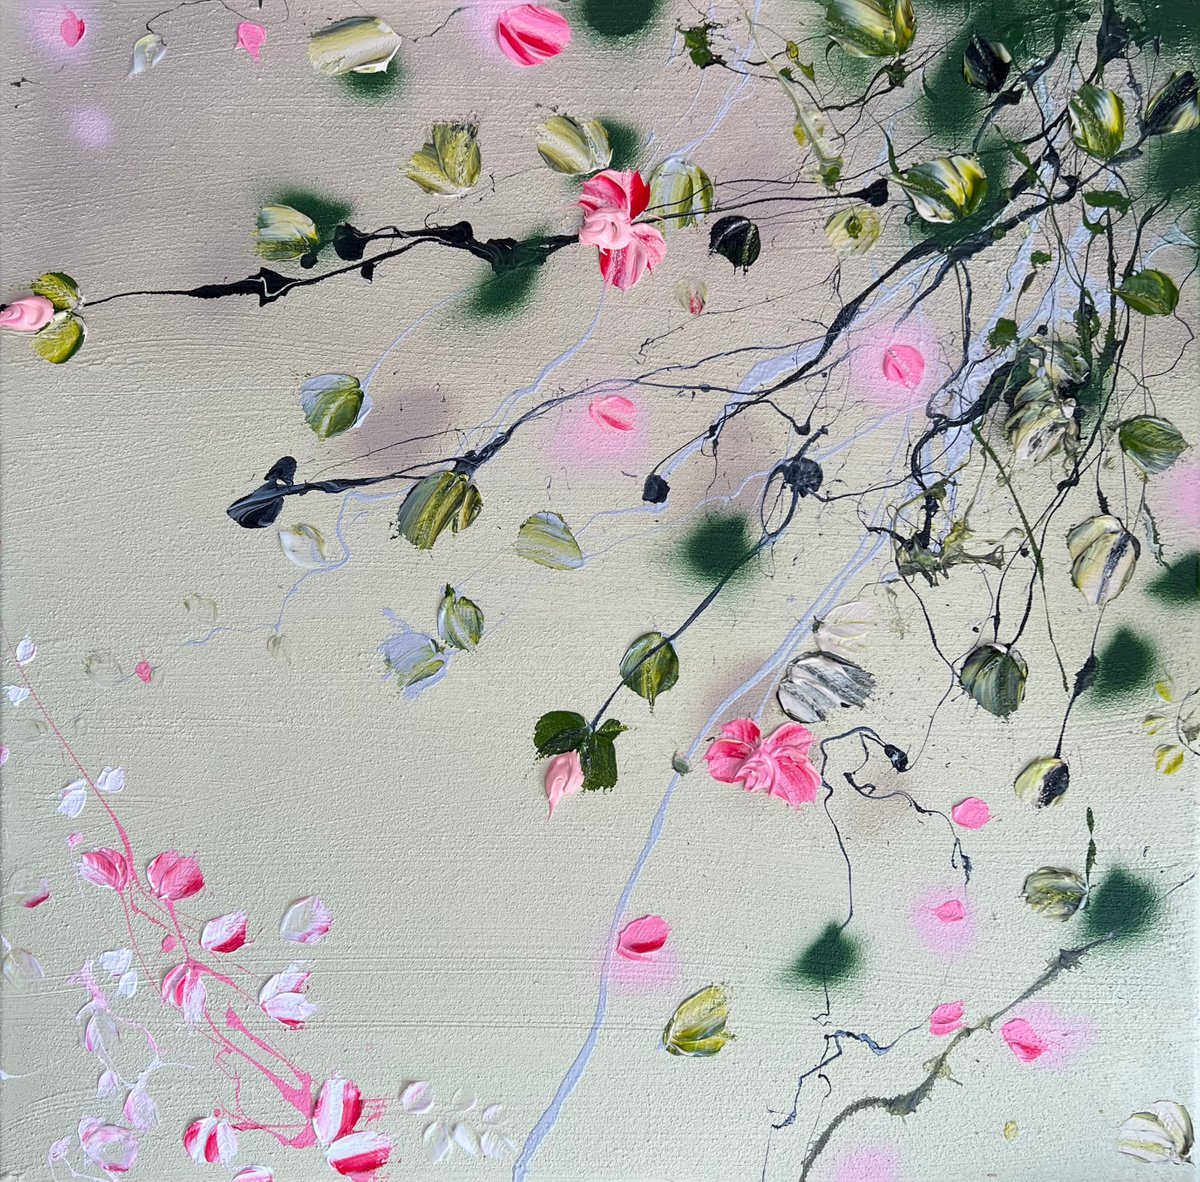 Square acrylic structure painting with flowers Warm Afternoon II 60x60x2cm, mixed media by Anastassia Skopp